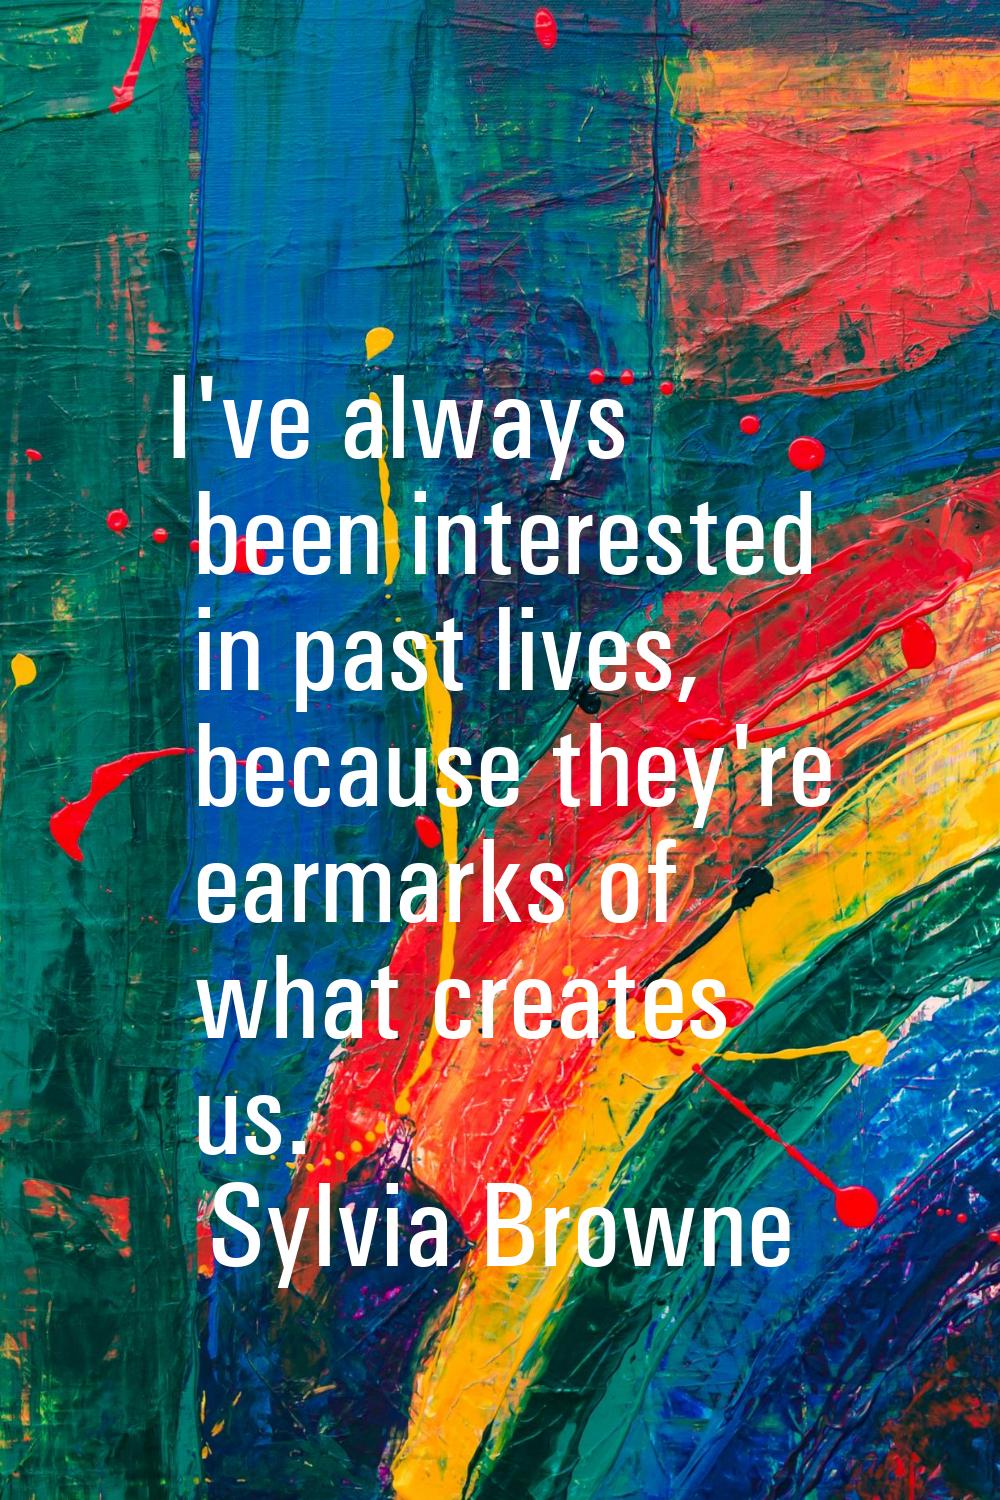 I've always been interested in past lives, because they're earmarks of what creates us.